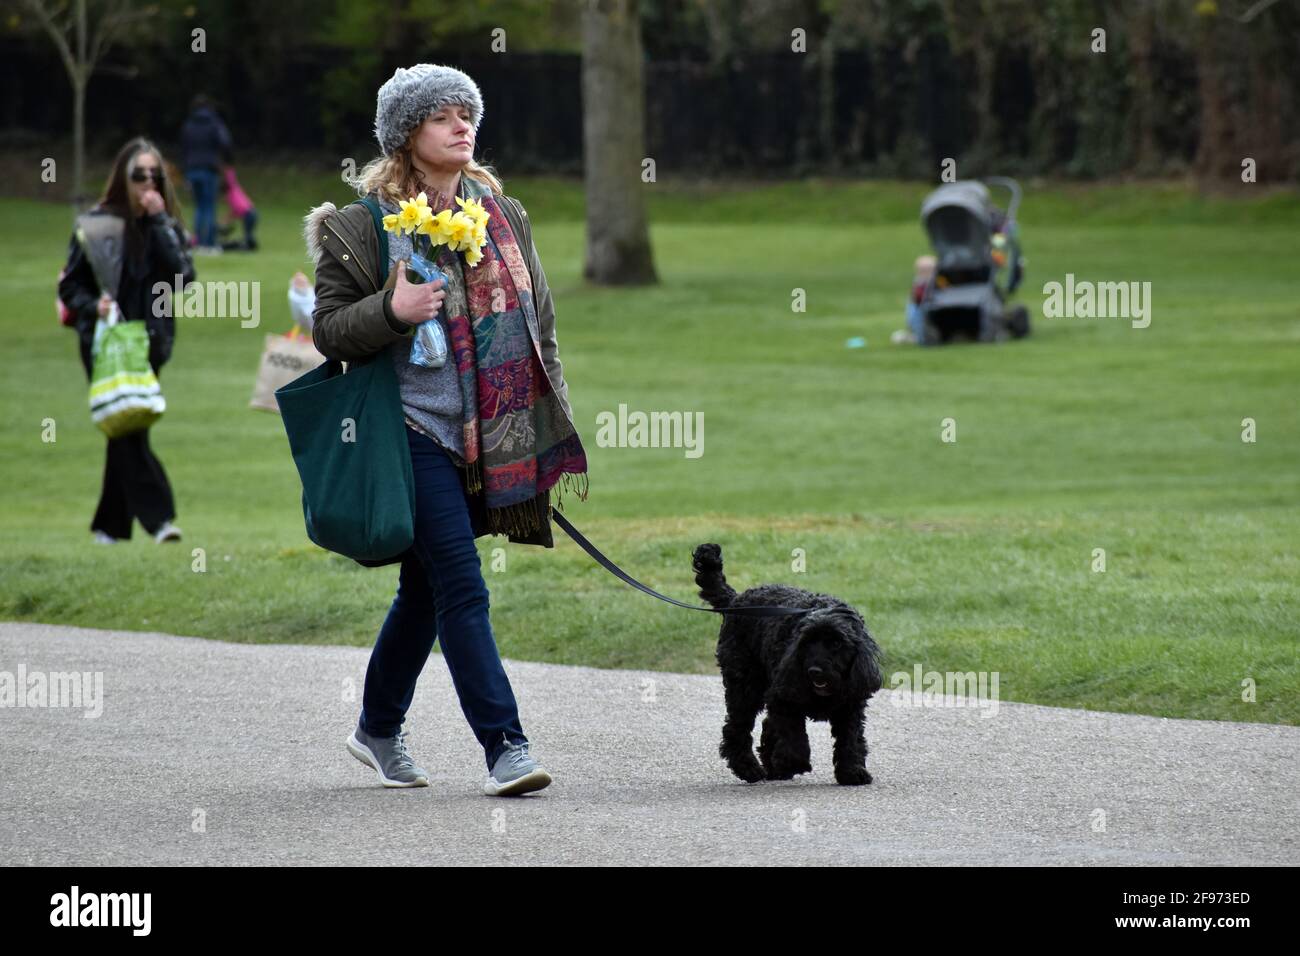 Windsor, UK, 16 April 2020 Tributes to Prince Phillip laid outside Windsor Castle. Windsor castle busy with tourists as well as preparations for Prince Phillip, the Duke of Edinburgh funeral. Credit: JOHNNY ARMSTEAD/Alamy Live News Stock Photo